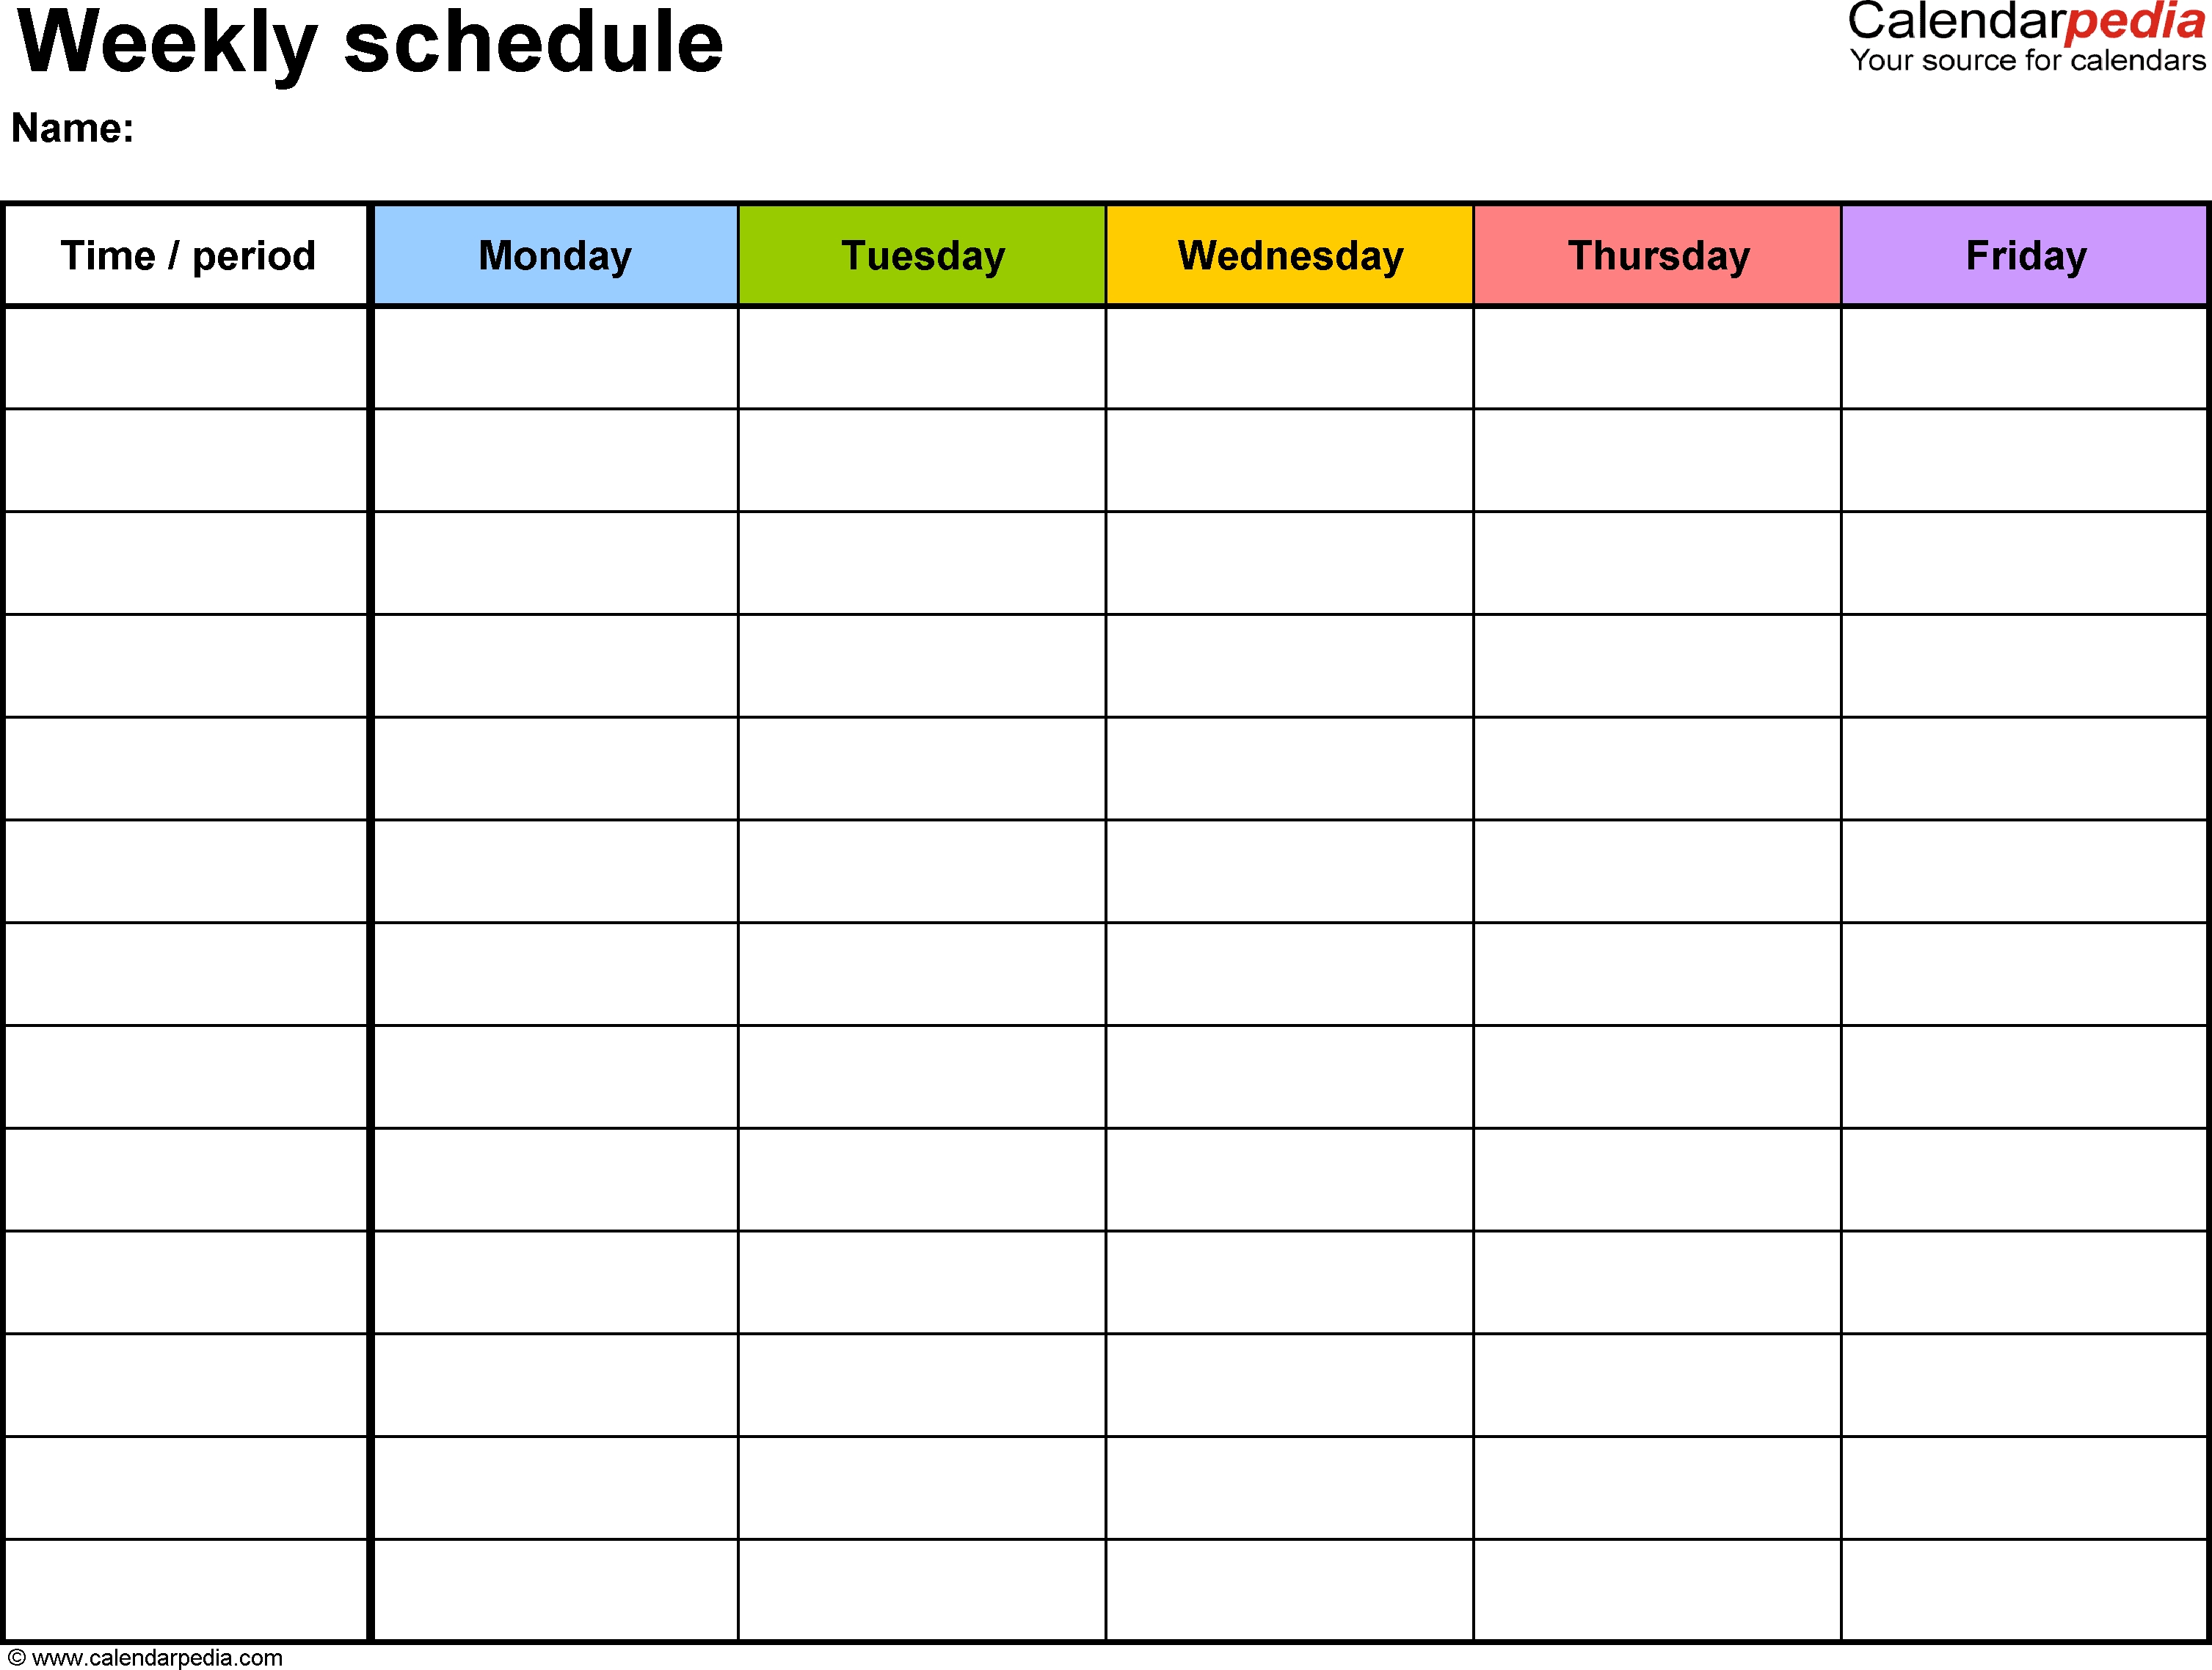 Free Weekly Schedule Templates For Excel - 18 Templates-Blank Excel Calender That Starts On Monday